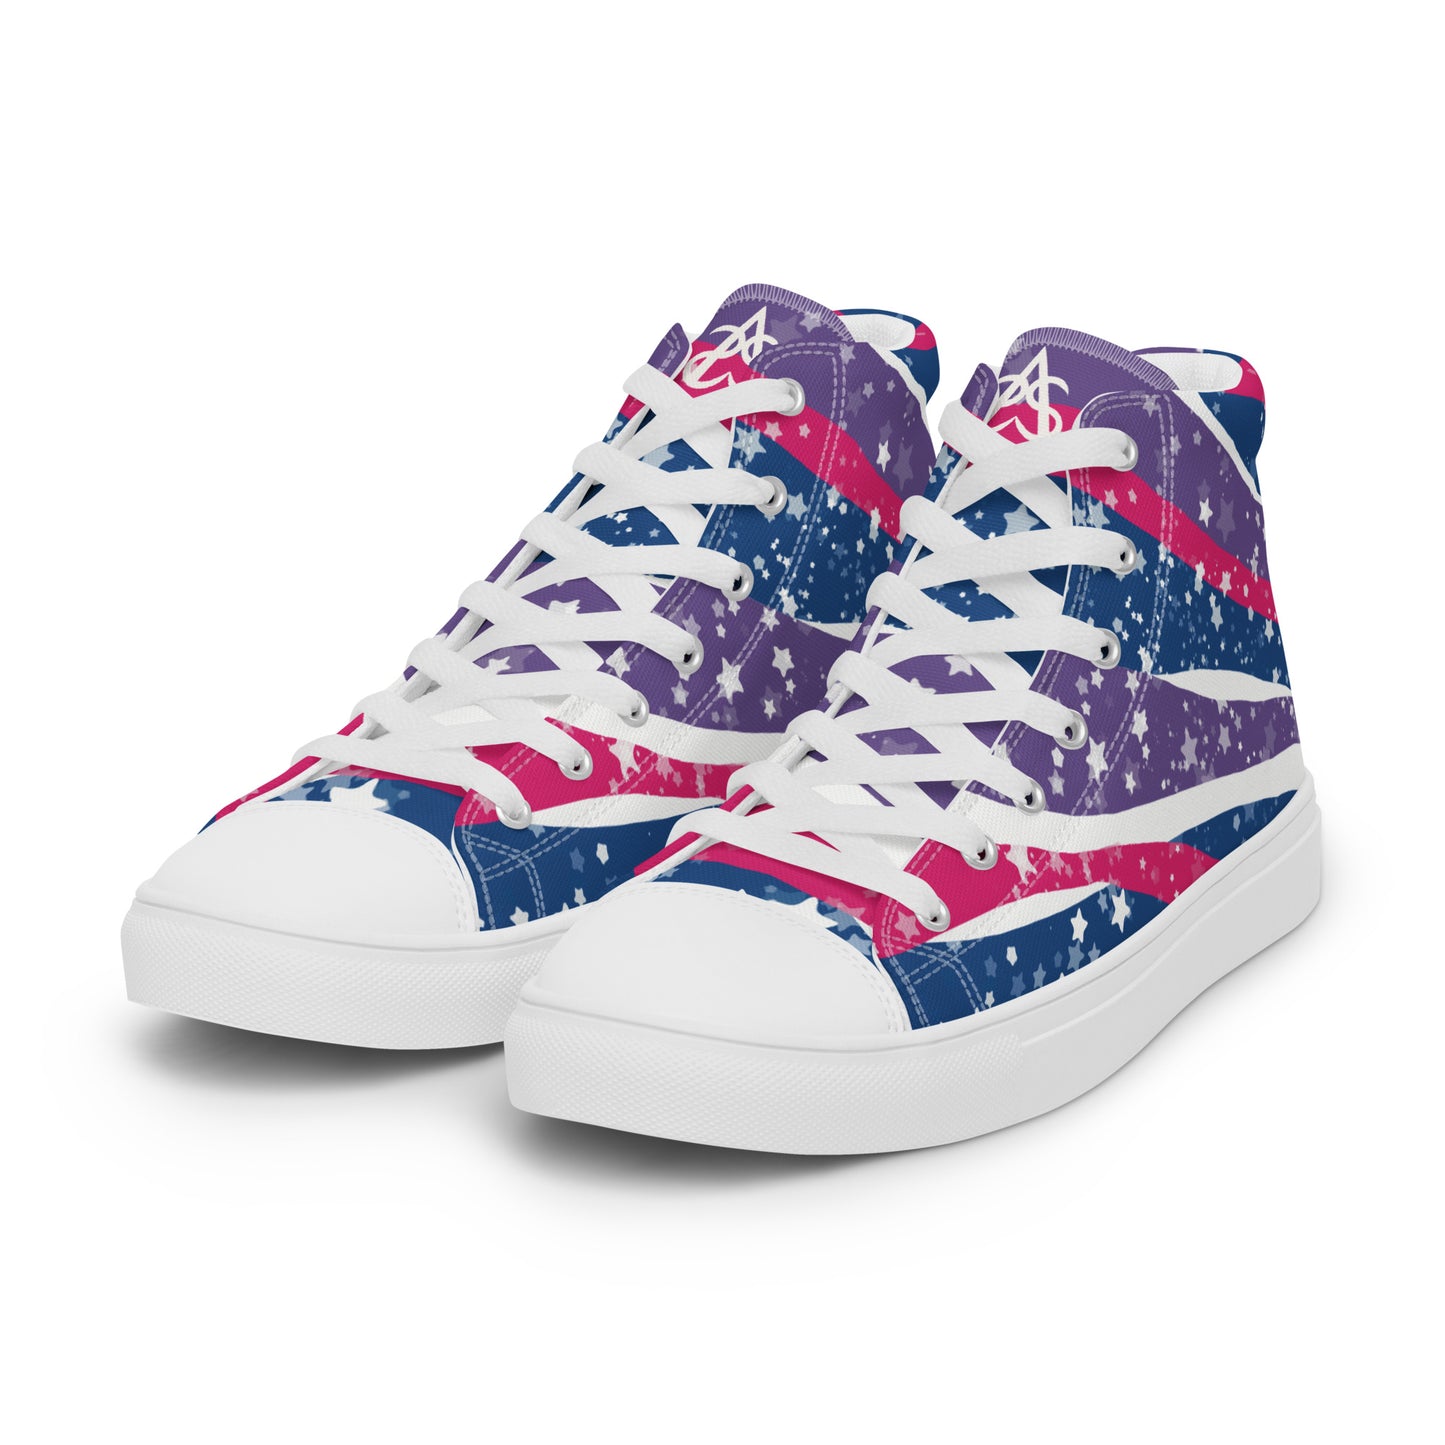 Left front view: a pair of high top shoes with pink, purple, and blue ribbons that get larger from heel to laces, white stars, and the Aras Sivad logo on the tongue.